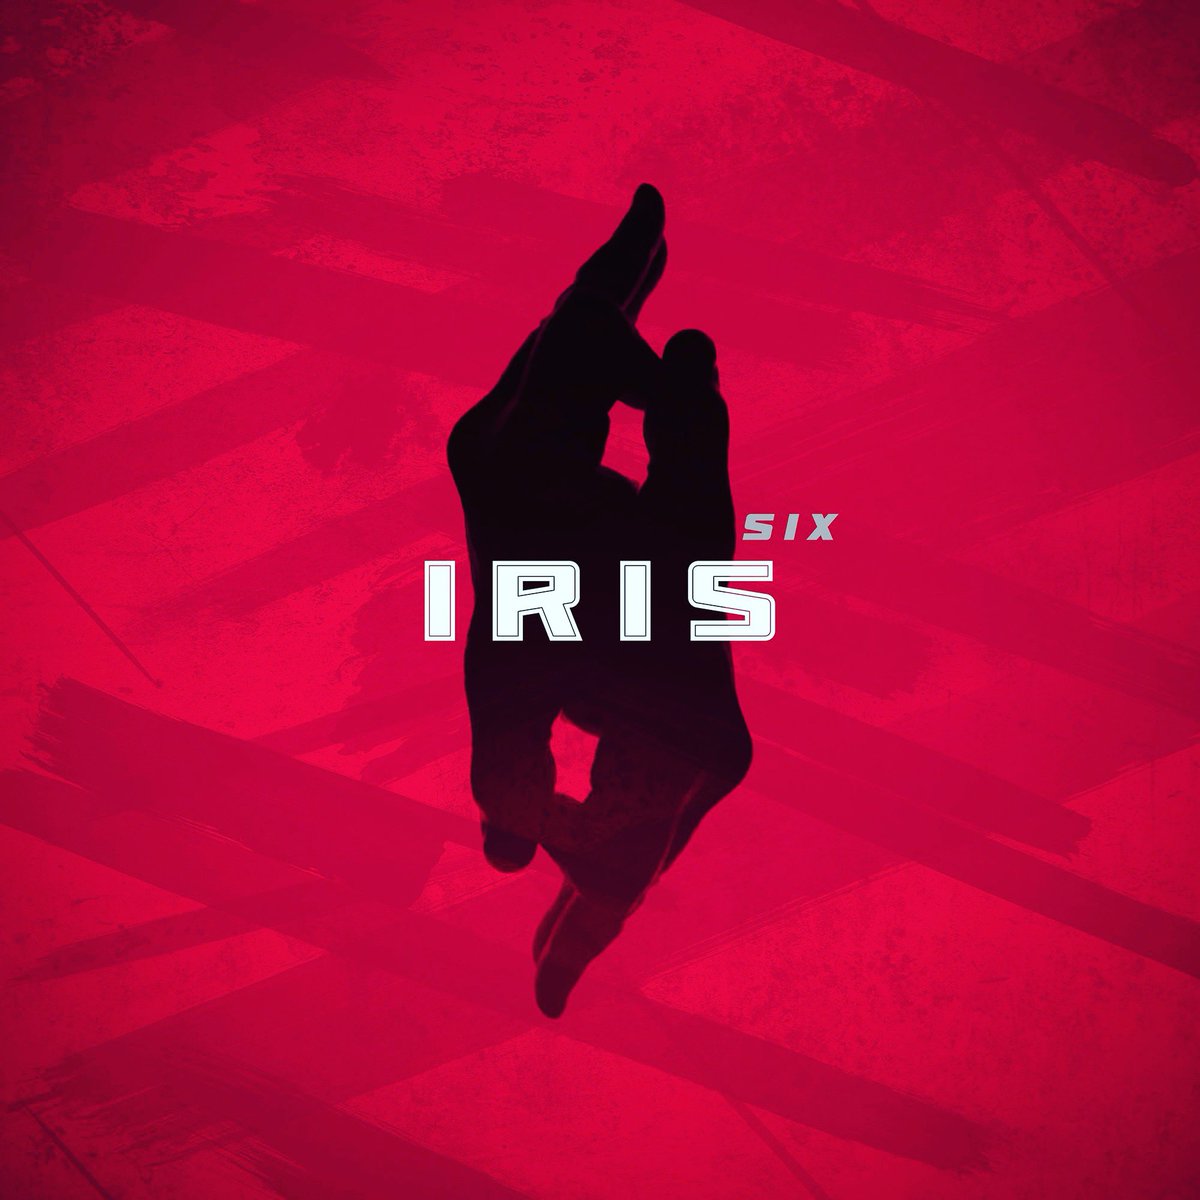 IRIS from the US are back with a new album. Release date August 26th. Come and watch them live in Europe: 25.10.19 Göteborg 27.10.19 Warsaw 29.10.19 Rüsselsheim 30.10.19 Hamburg 31.10.19 Oberhausen 01.11.19 Berlin 02.11.19 Leipzig 👉🏻pluswelt.com/iris